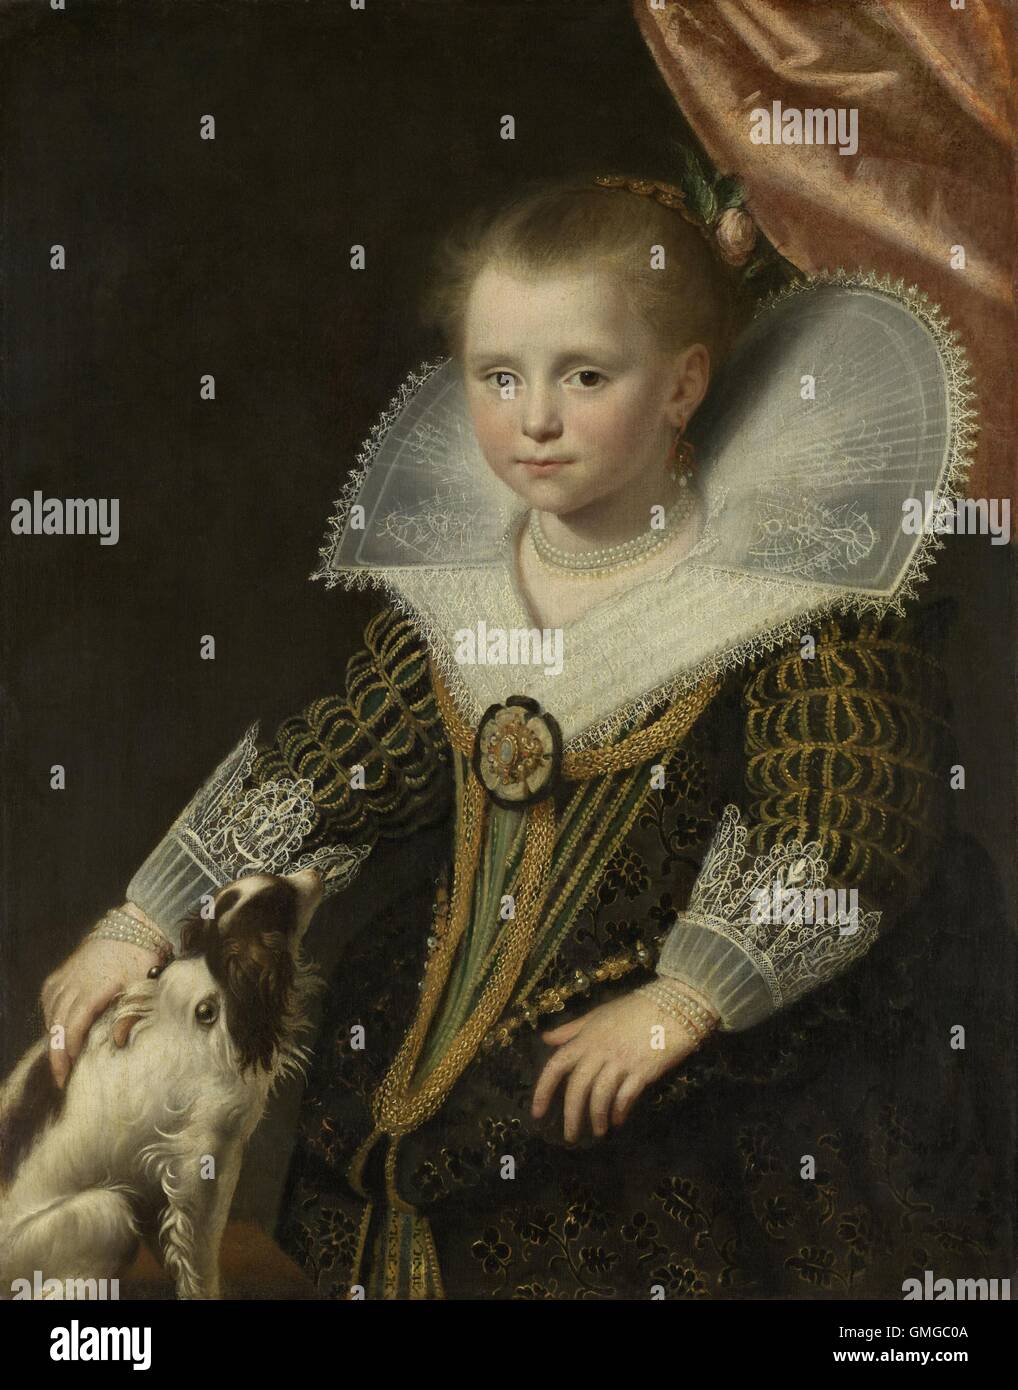 Portrait of a Girl, by Paulus Moreelse, c. 1623, Dutch painting, oil on canvas. The painting is also known as 'The Little Princess', because of her ornate costume and jewelry. Her right hand pets a dog whose collar has two large sized pearl like ornaments (BSLOC 2016 3 106) Stock Photo